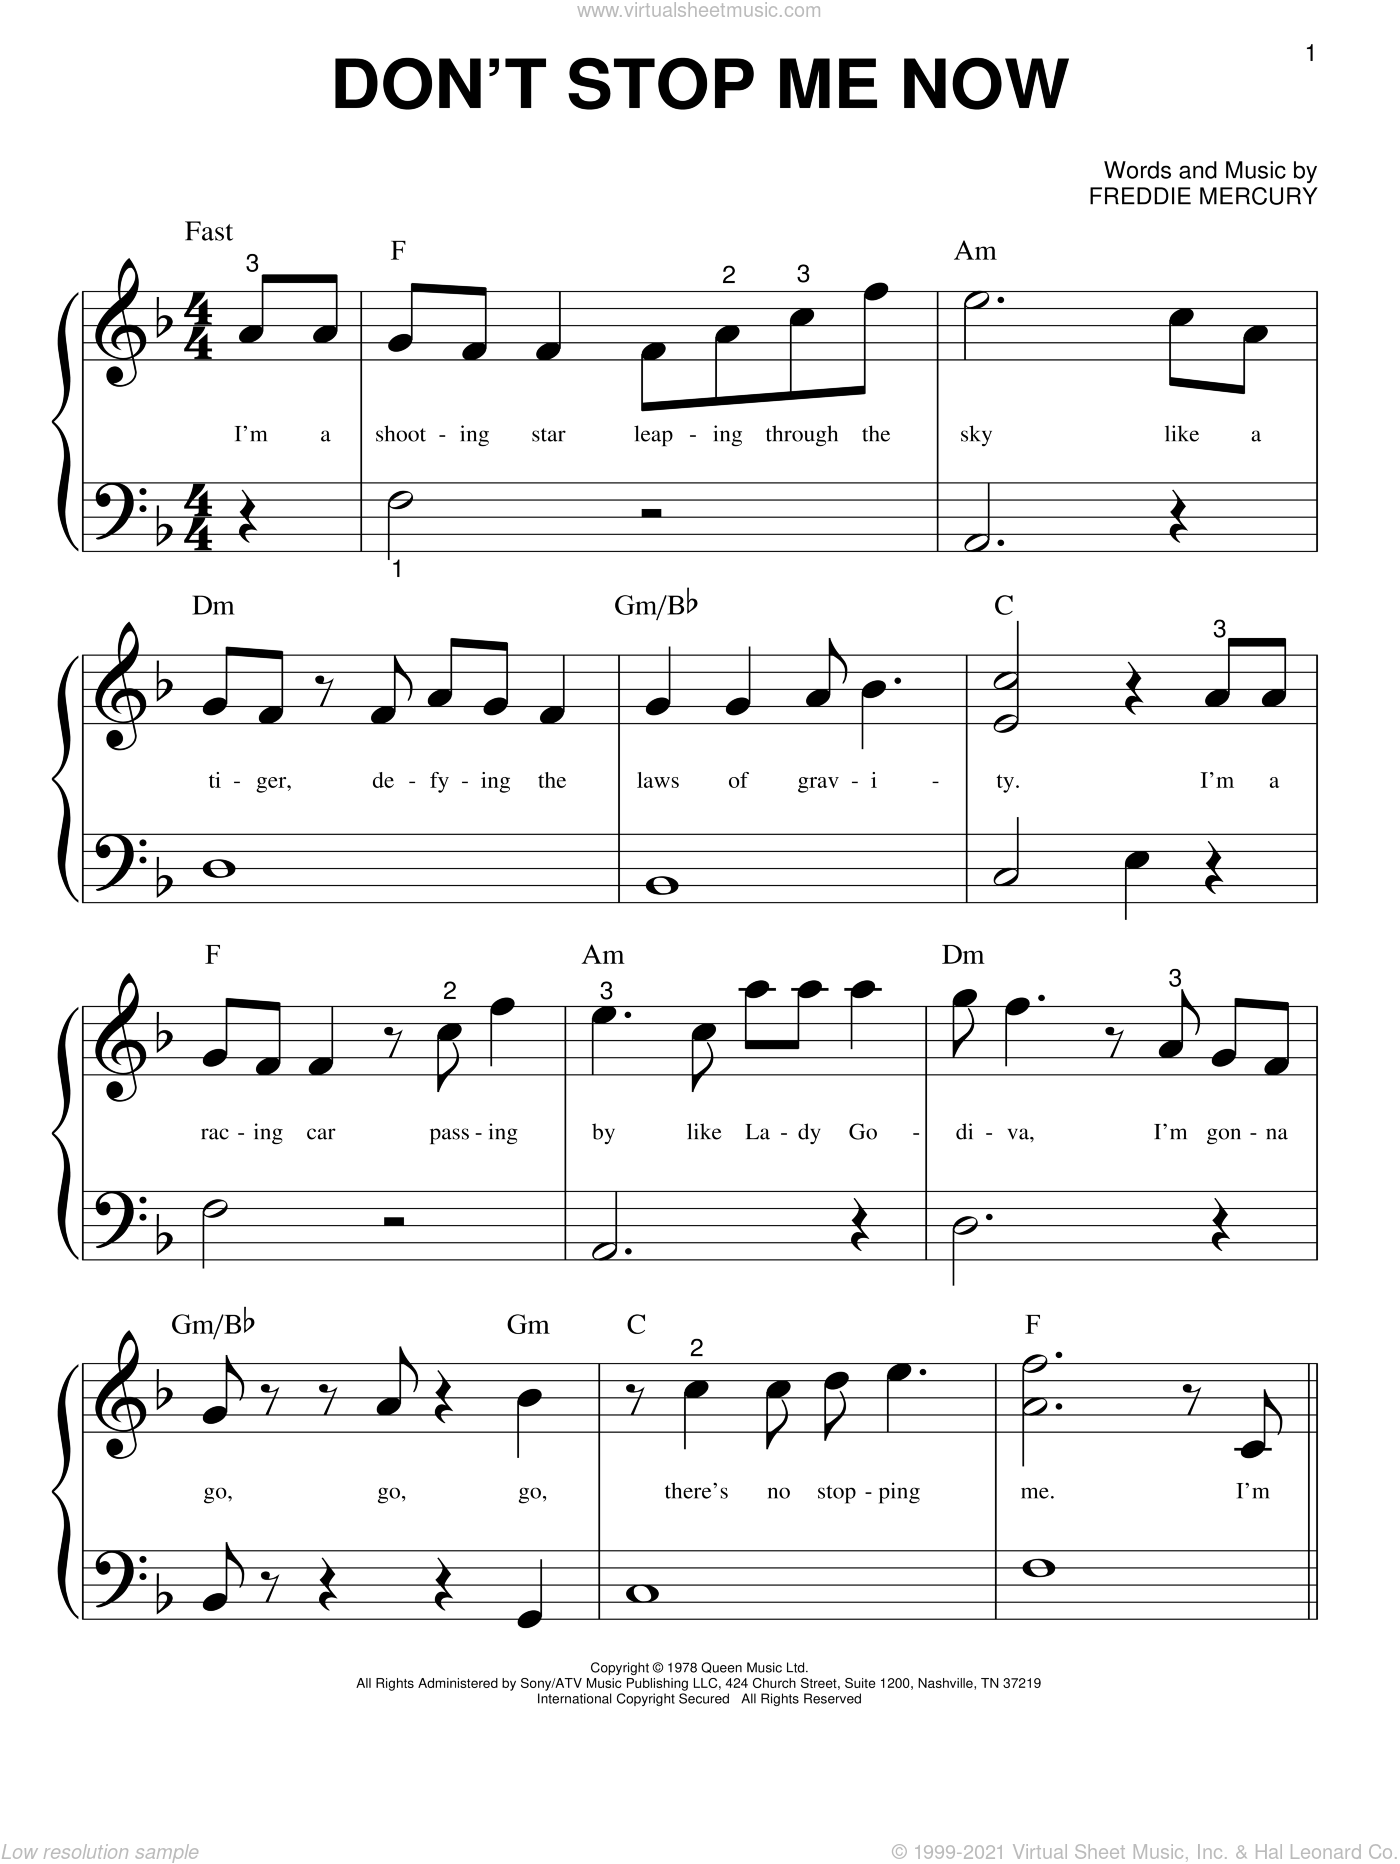 Don't Stop Me Now sheet music for piano solo note book)